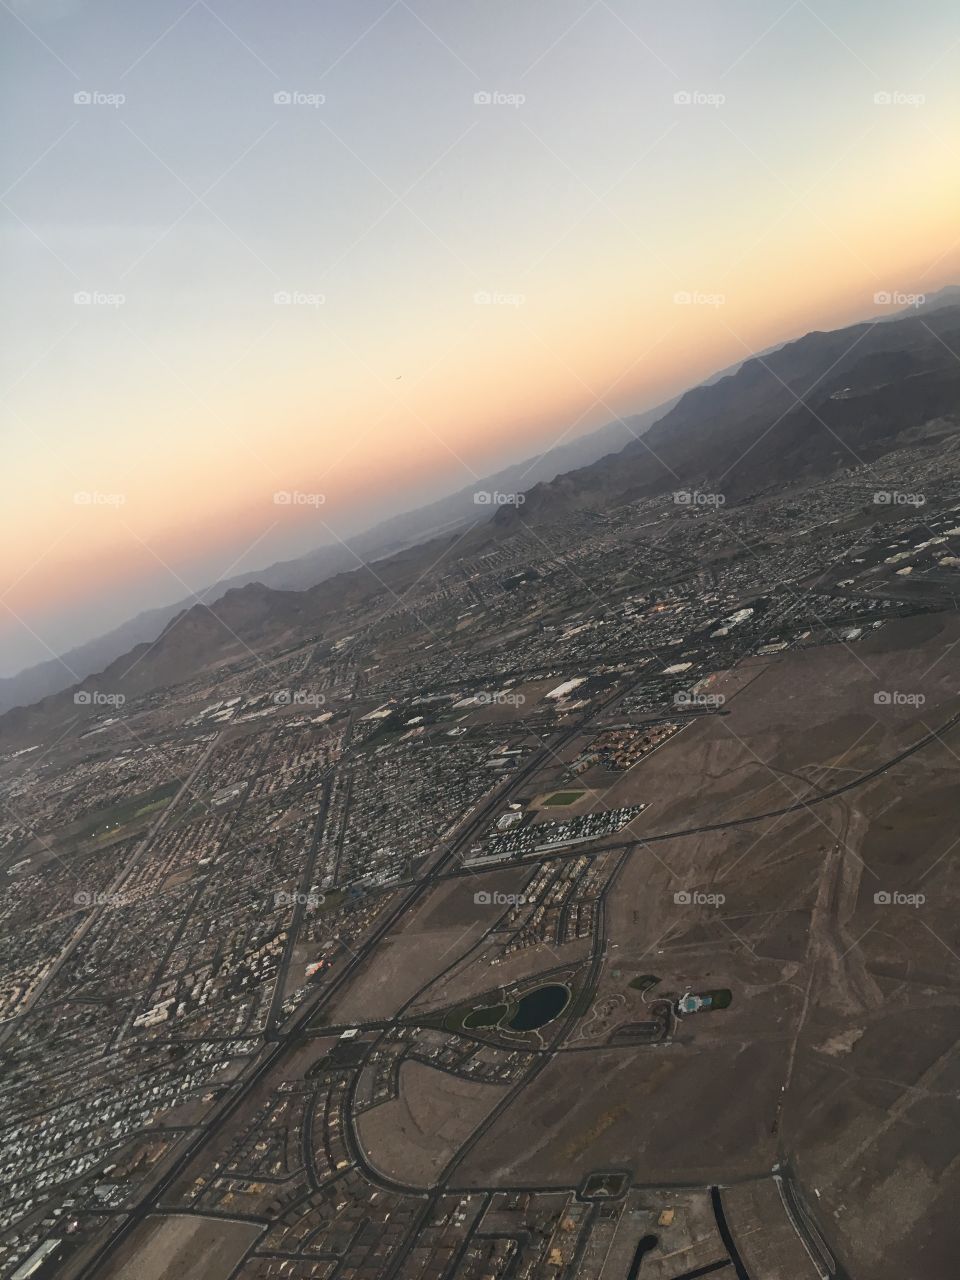 A scenic view from the airplane window. Gorgeous colors from the sunset while traveling.